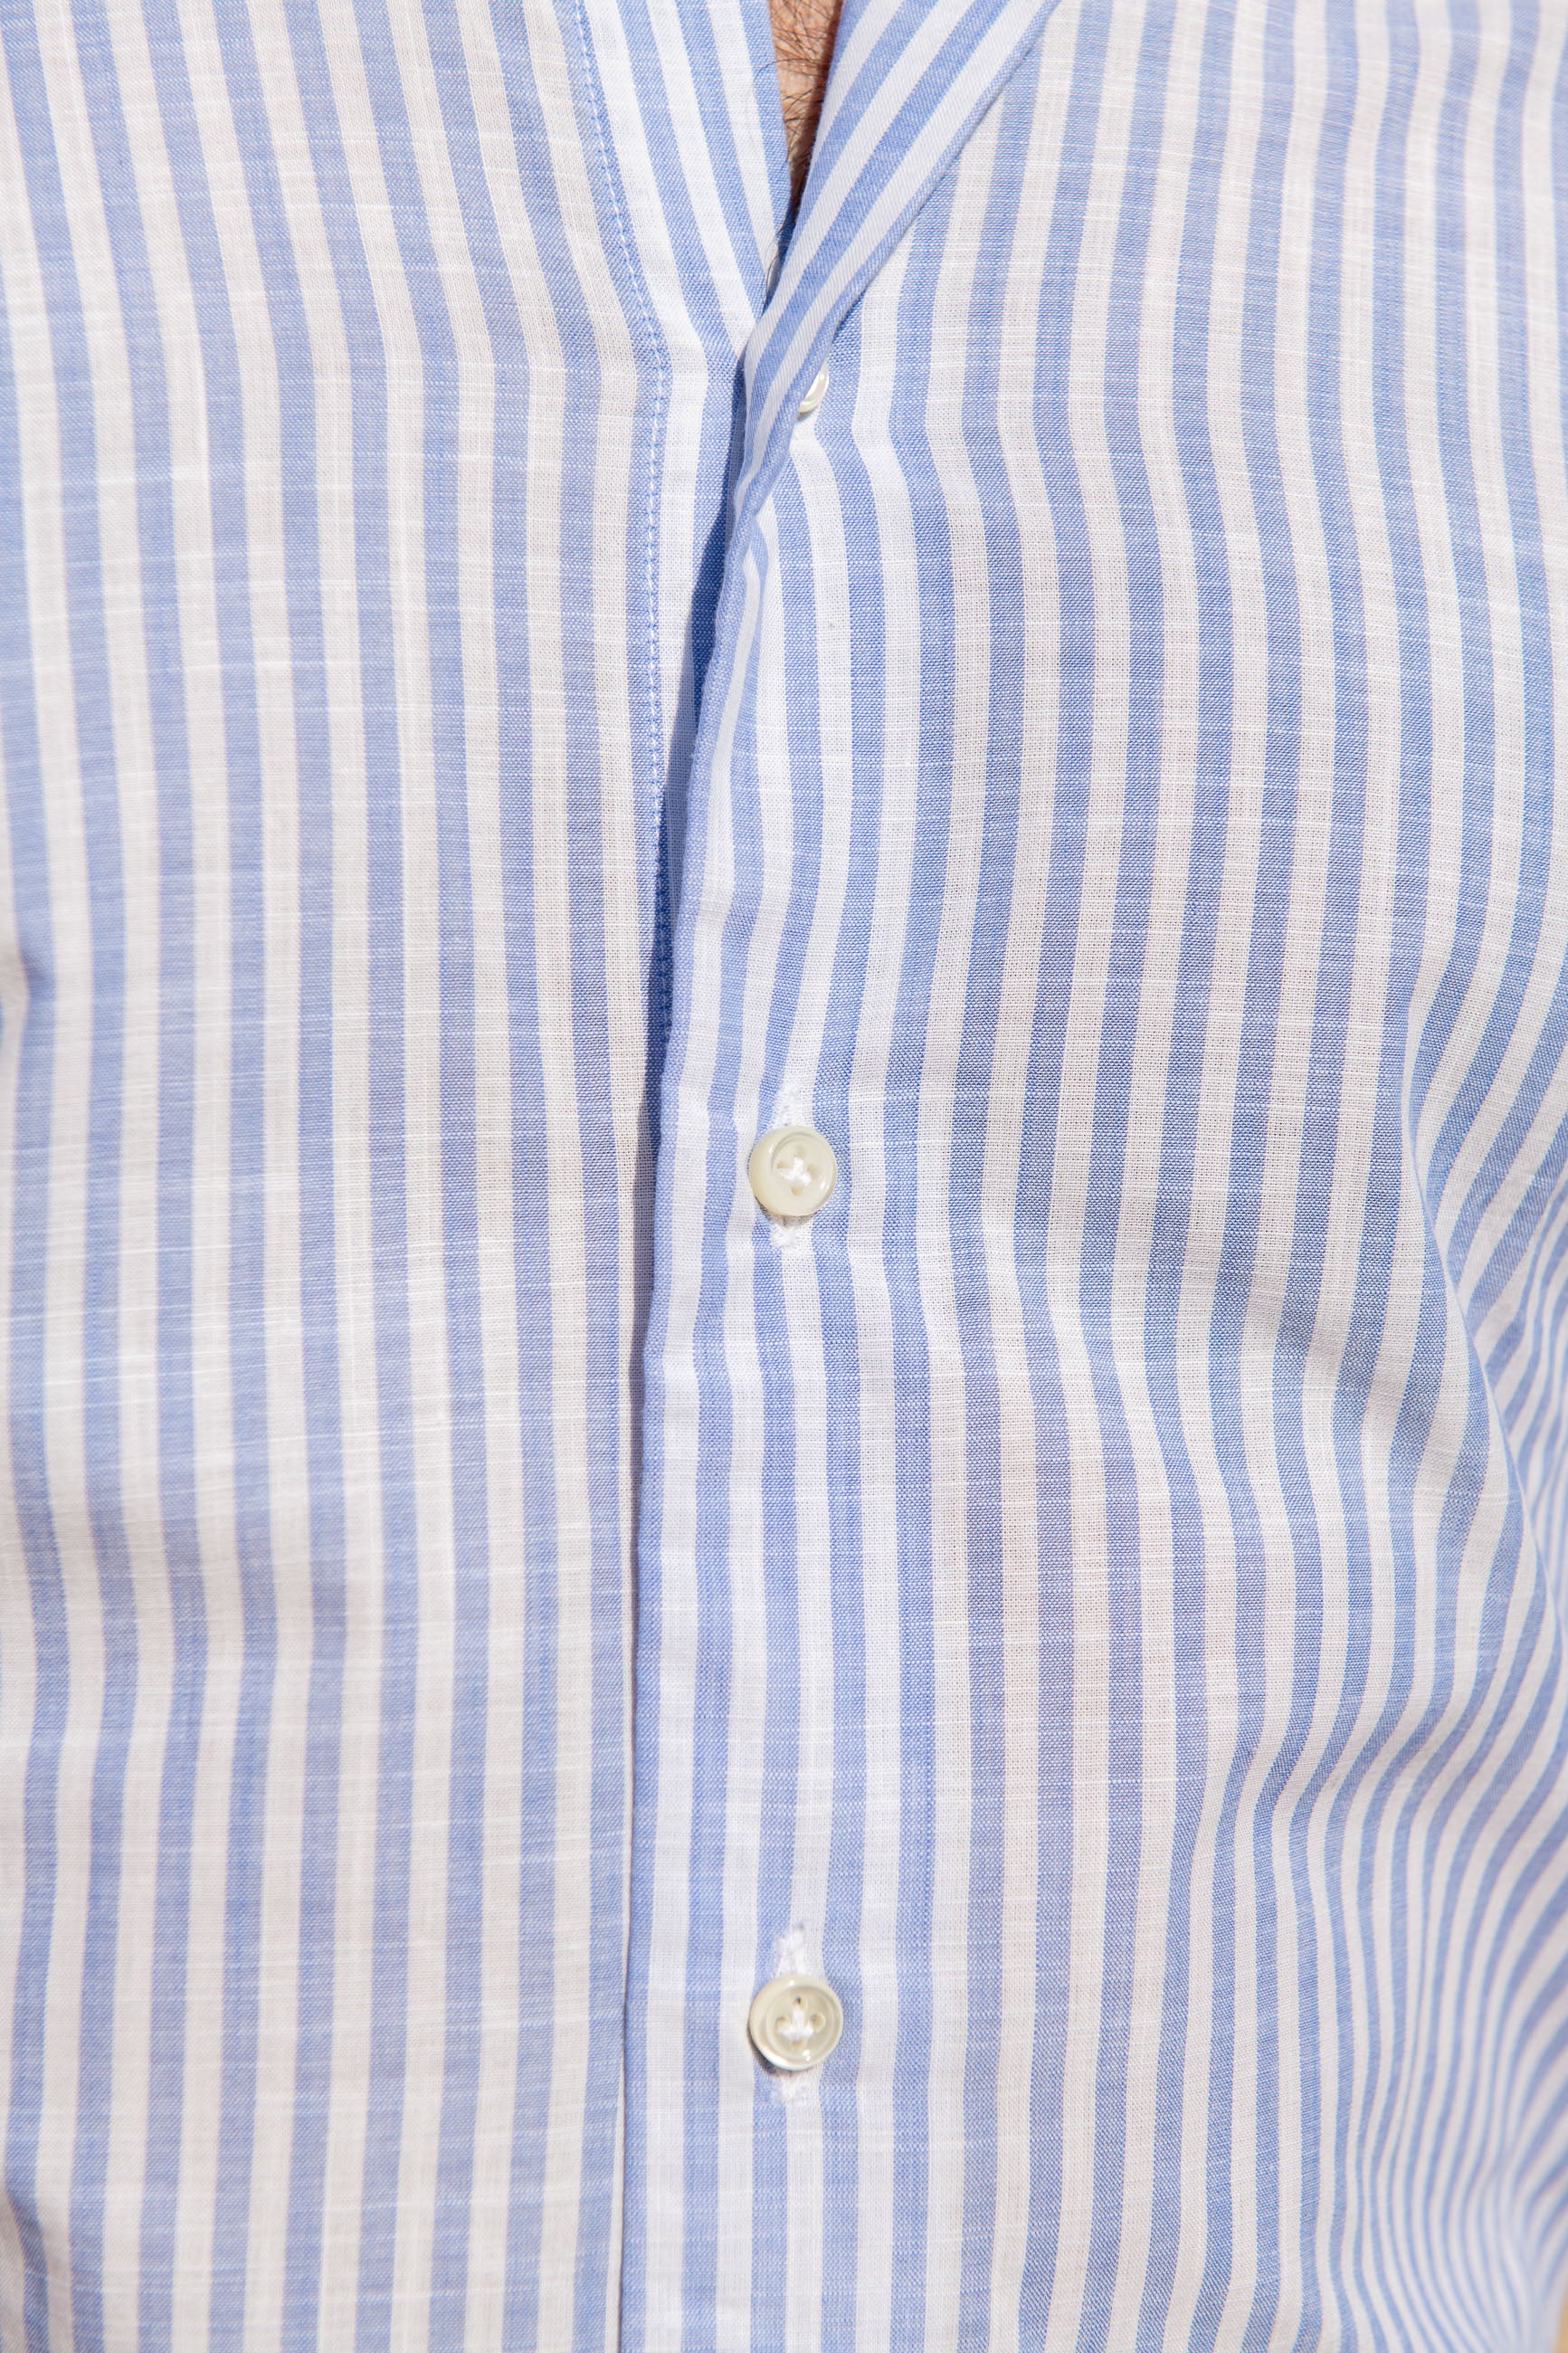 Button down light blue striped shirt ”Sartoriale collection”- Made In Italy